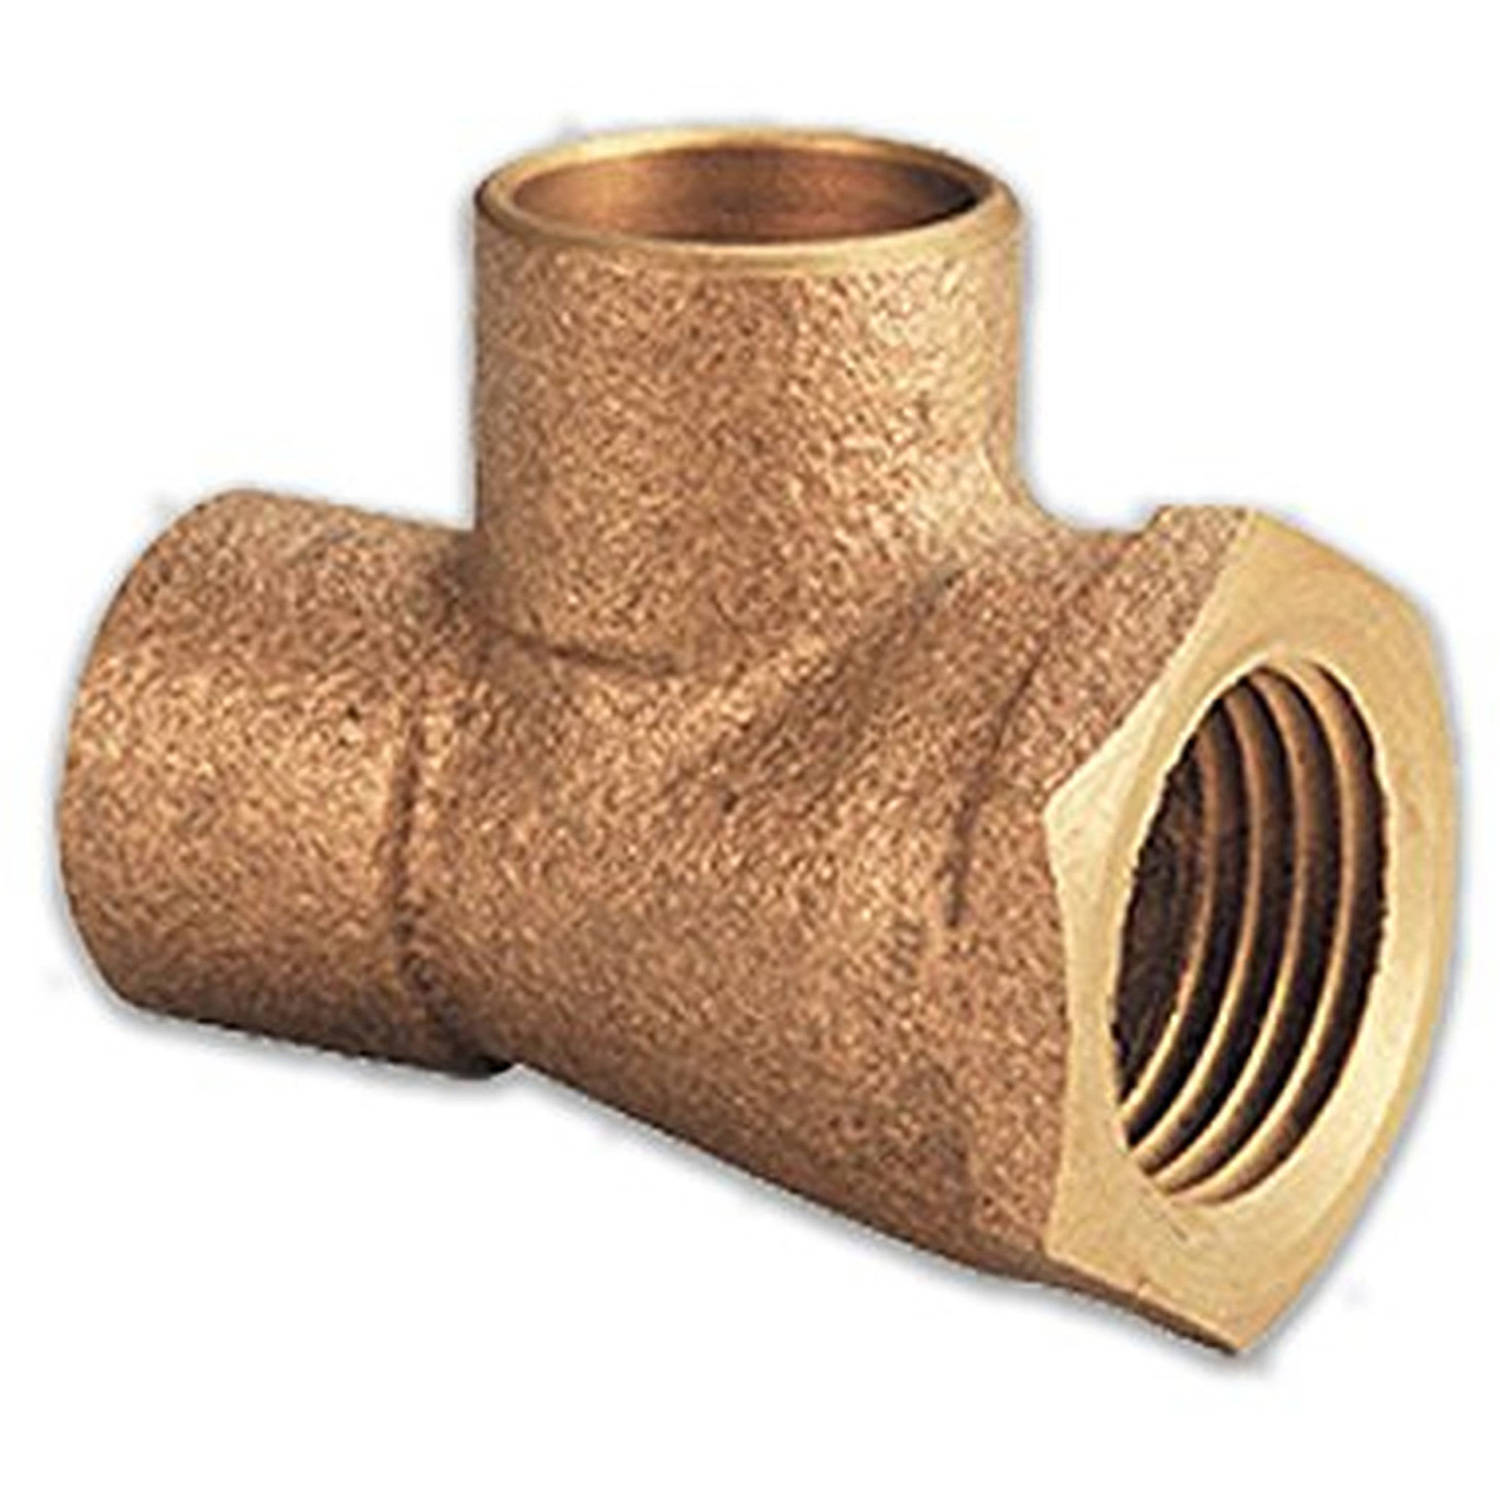 Supply Giant CCFT1134-NL CXCXF Lead Free Cast Brass Tee Fitting with Solder Cups and Female Threaded Branch, 1" x 1" x 3/4" - image 1 of 6